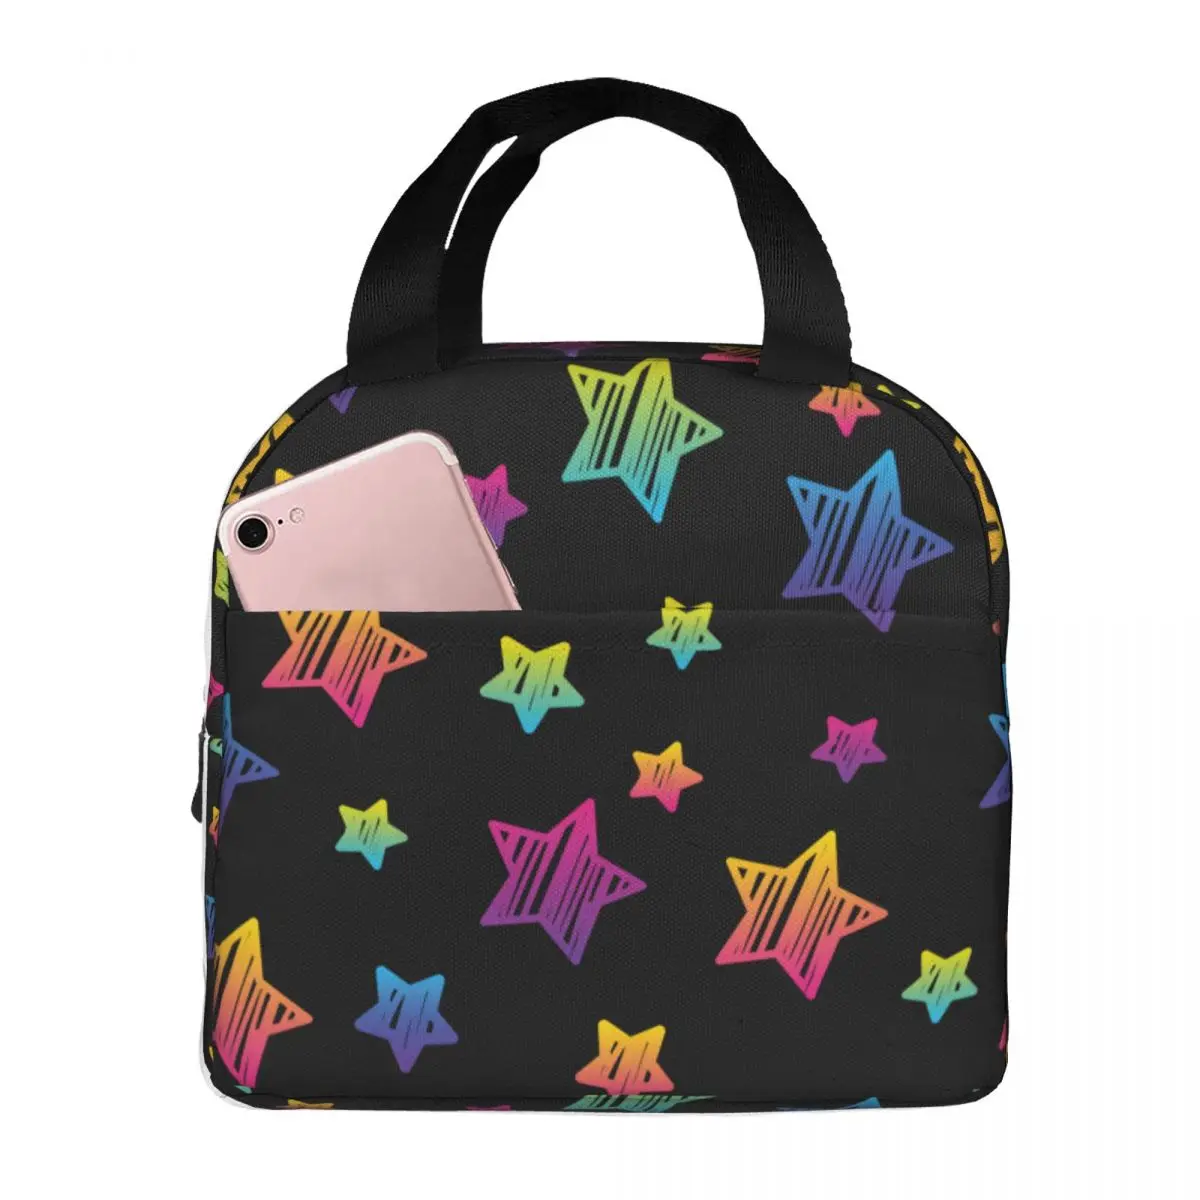 Star Pattern Lunch Bags Portable Insulated Oxford Cooler Bag Thermal Picnic Travel Tote for Women Kids